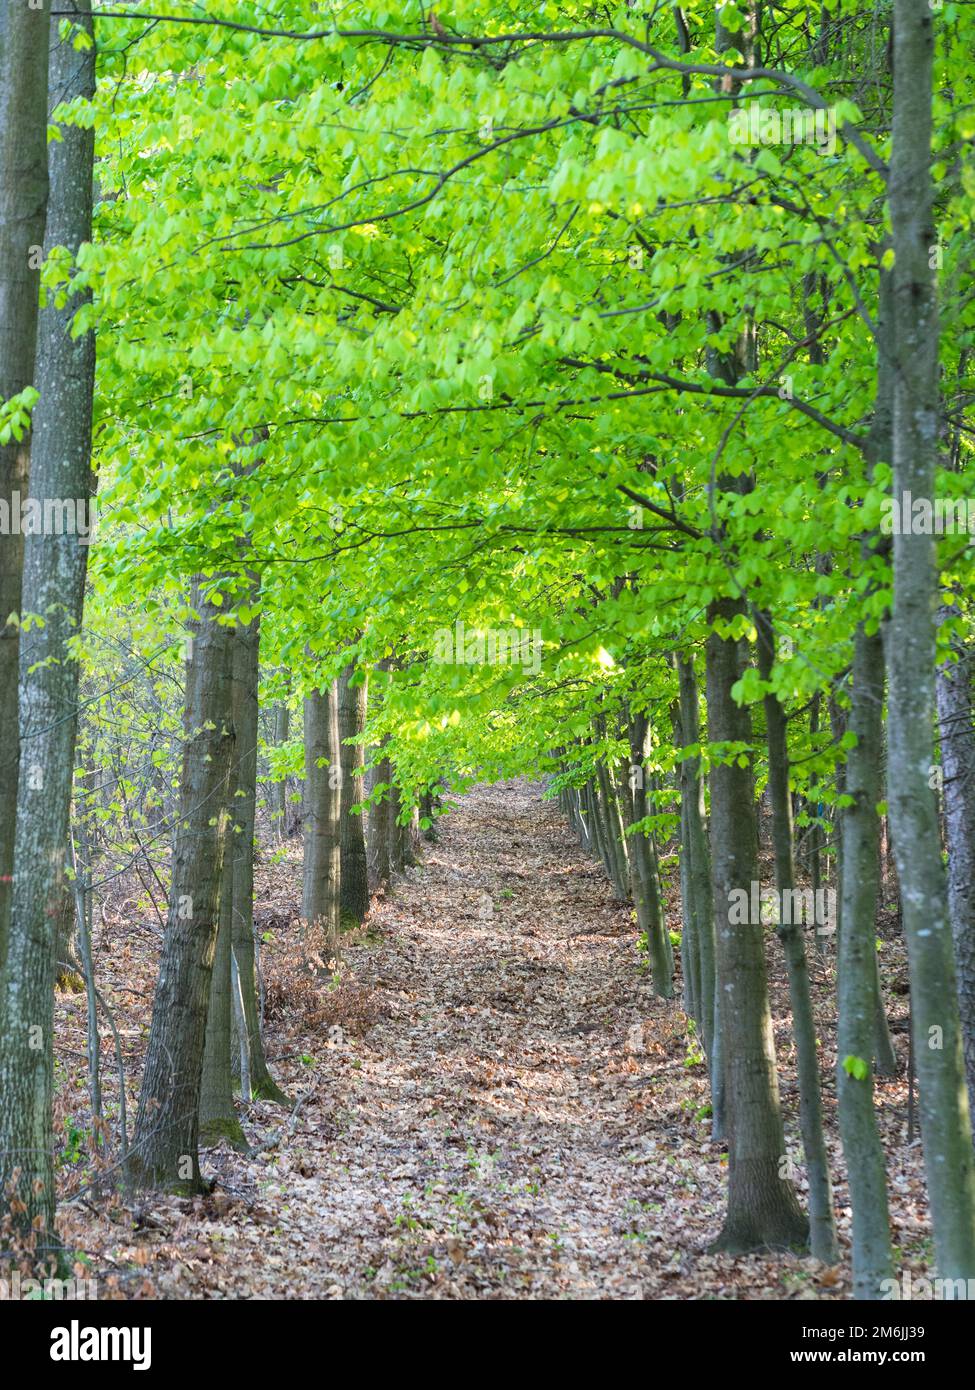 Tree alley at spring with small path Stock Photo